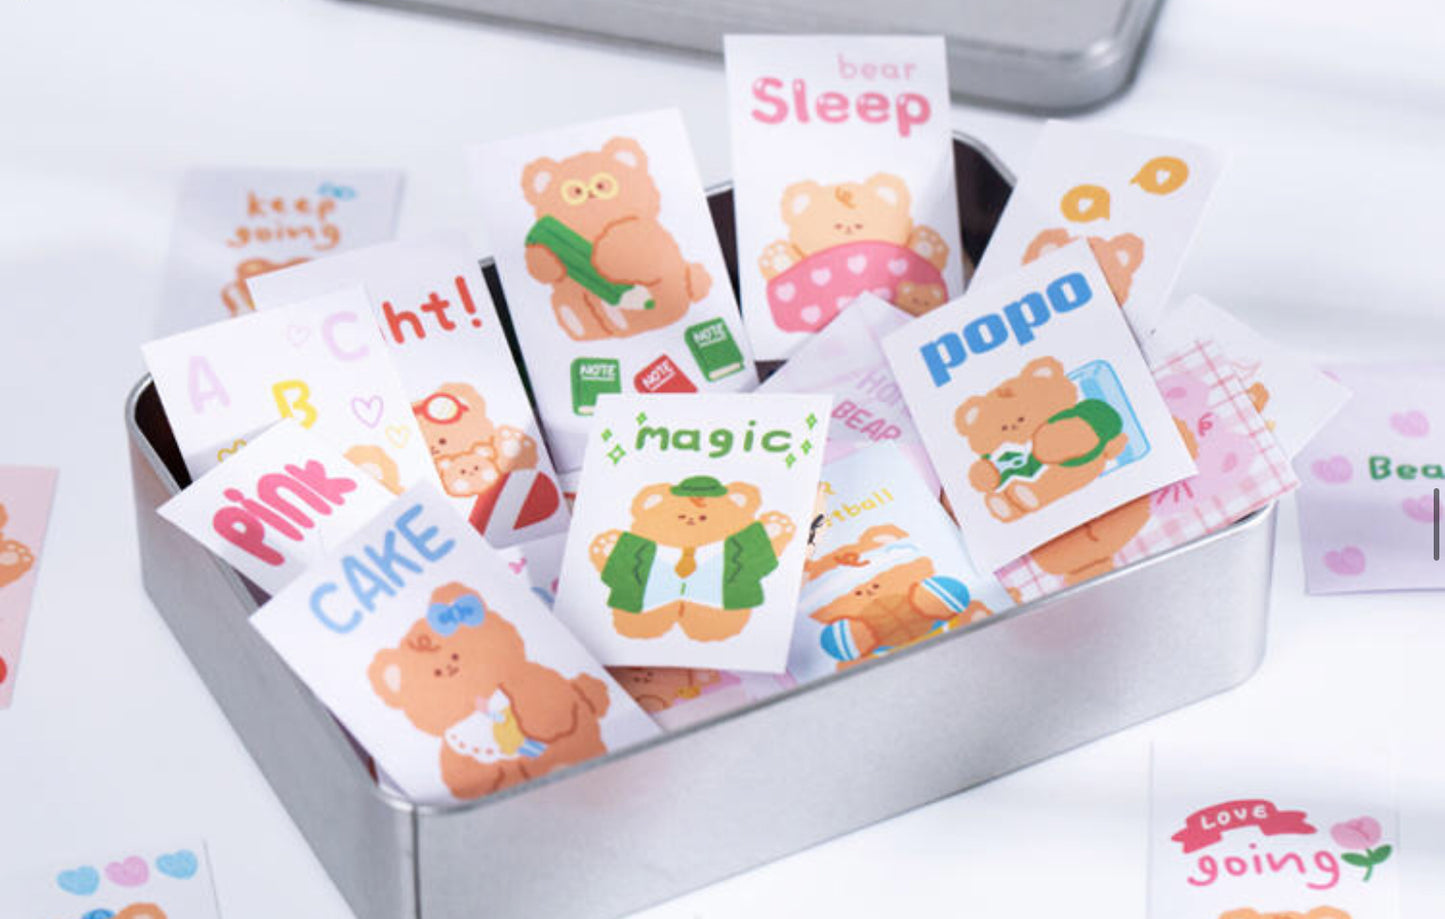 These super cute sticker books are perfect for journaling, planners, scrapbooking and more.